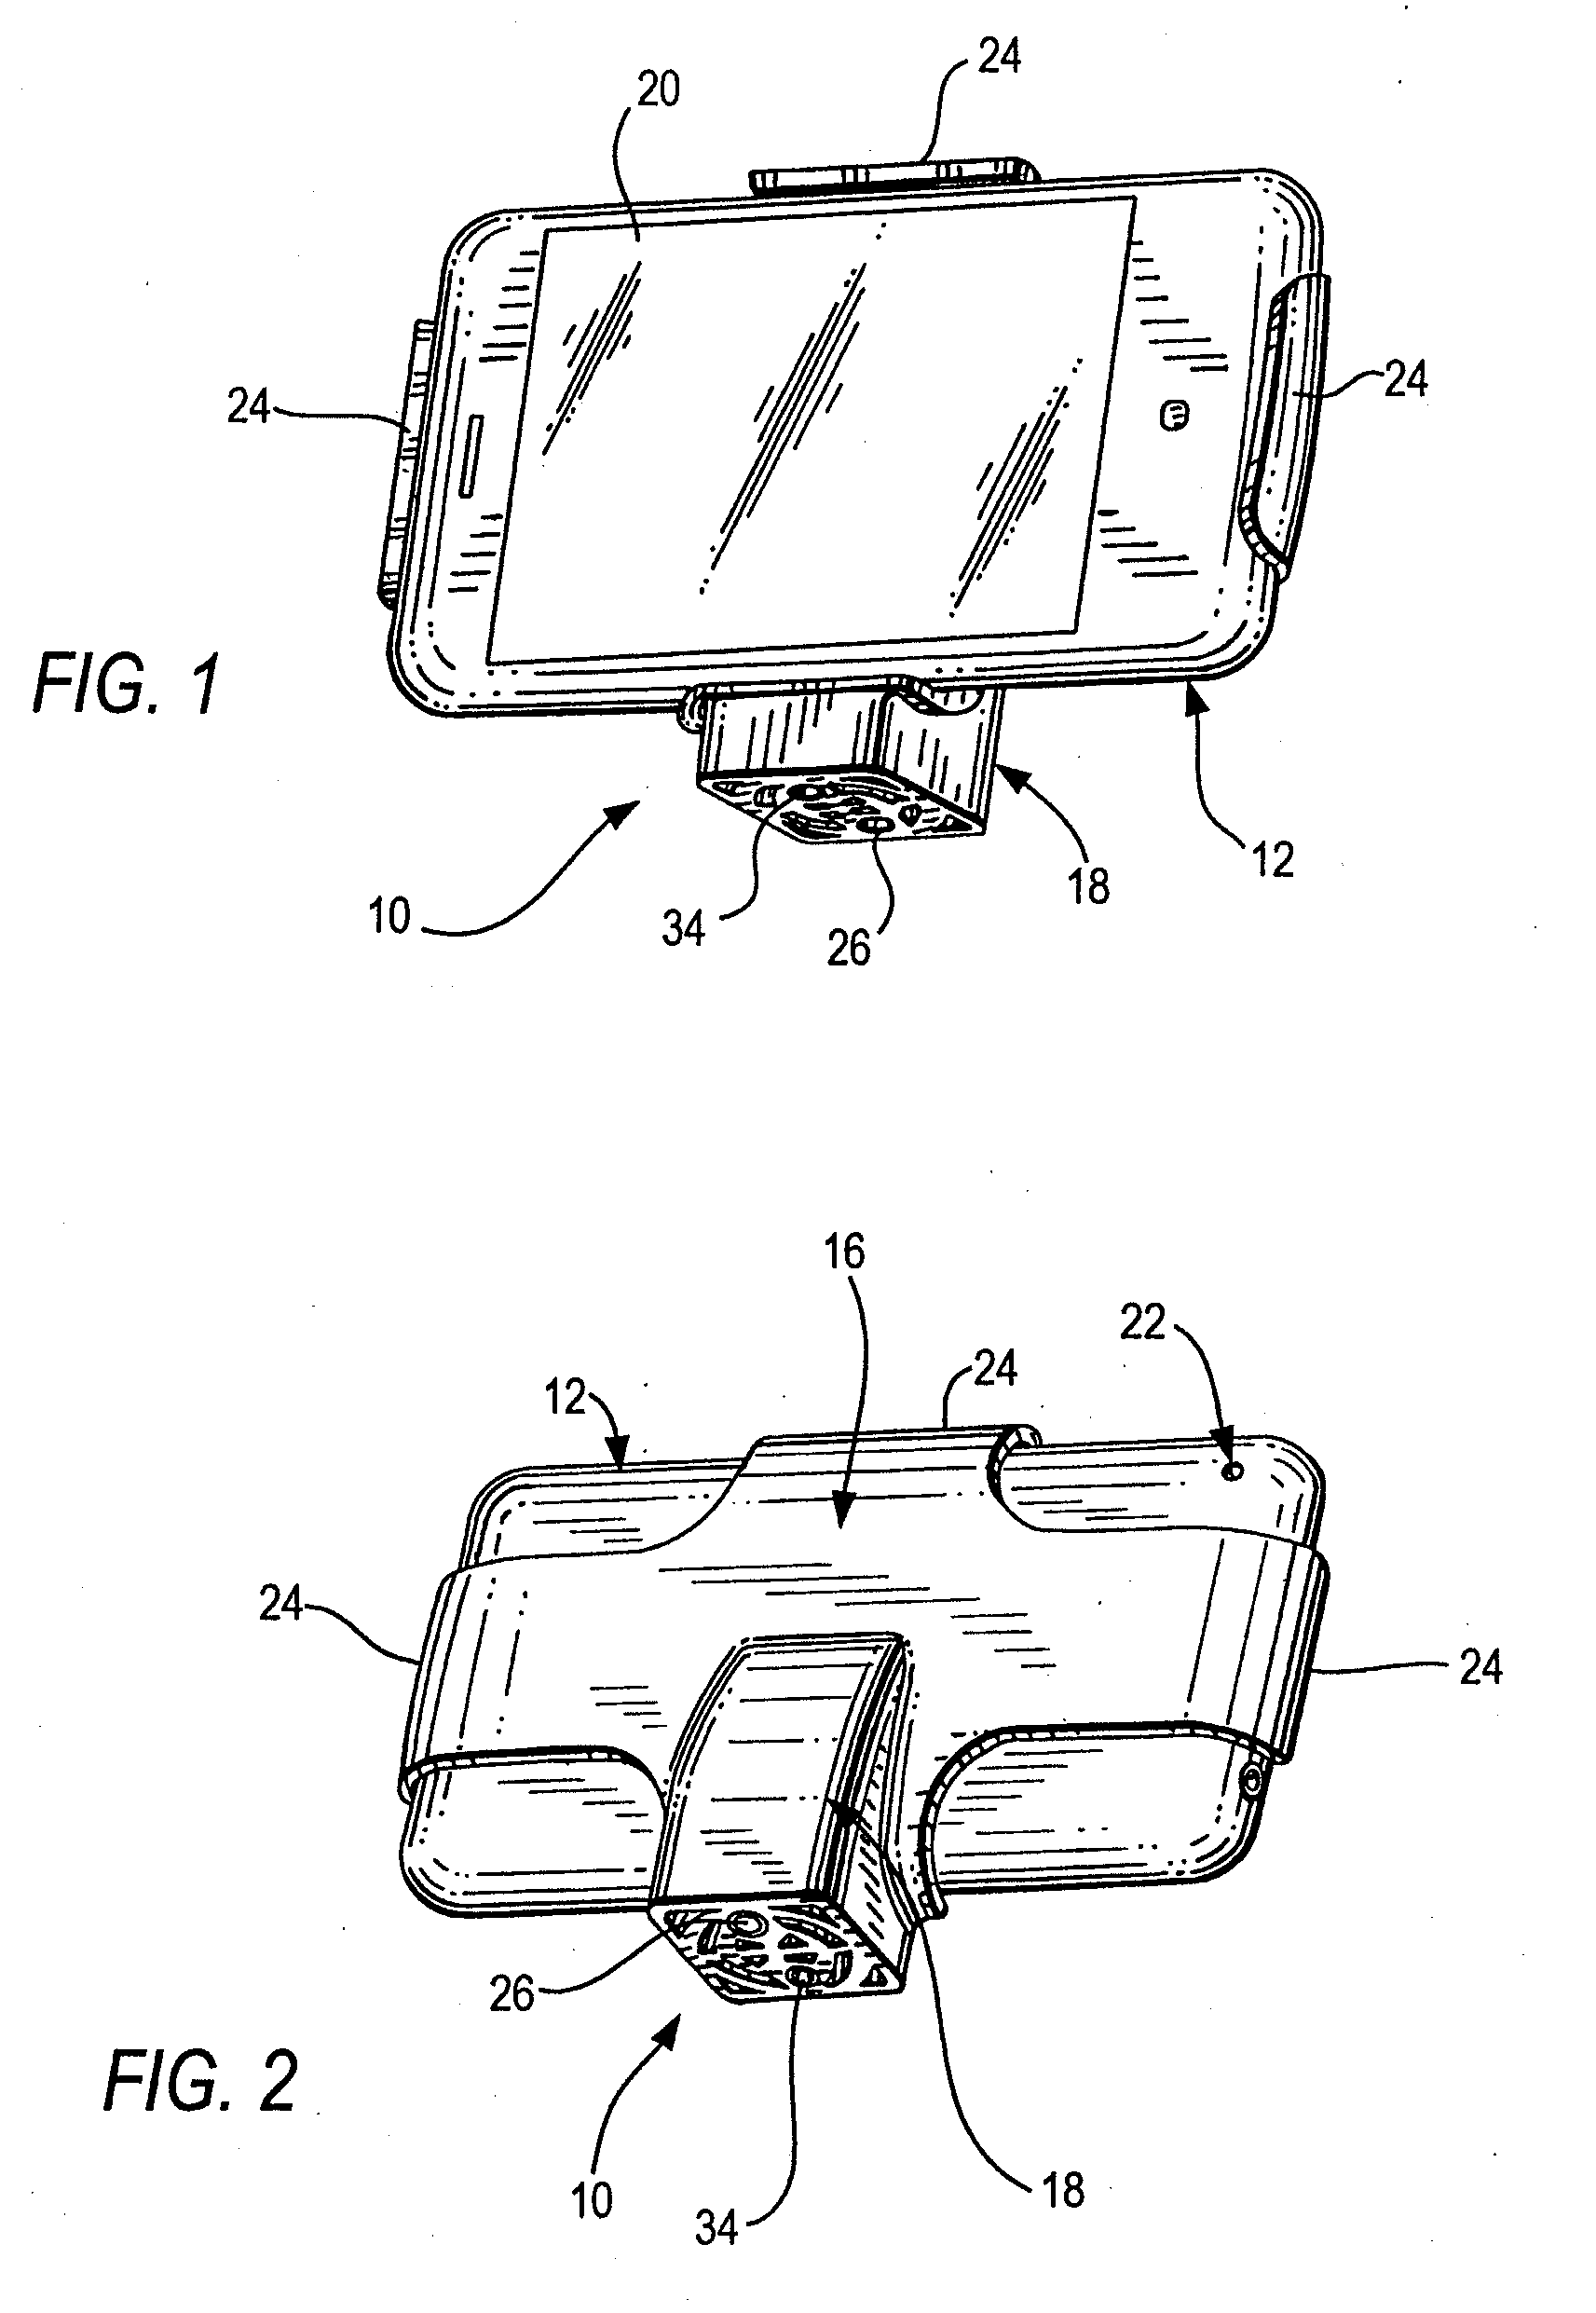 Weighted mounting arrangement for, and method of, steadily supporting a motion-sensitive, image capture device